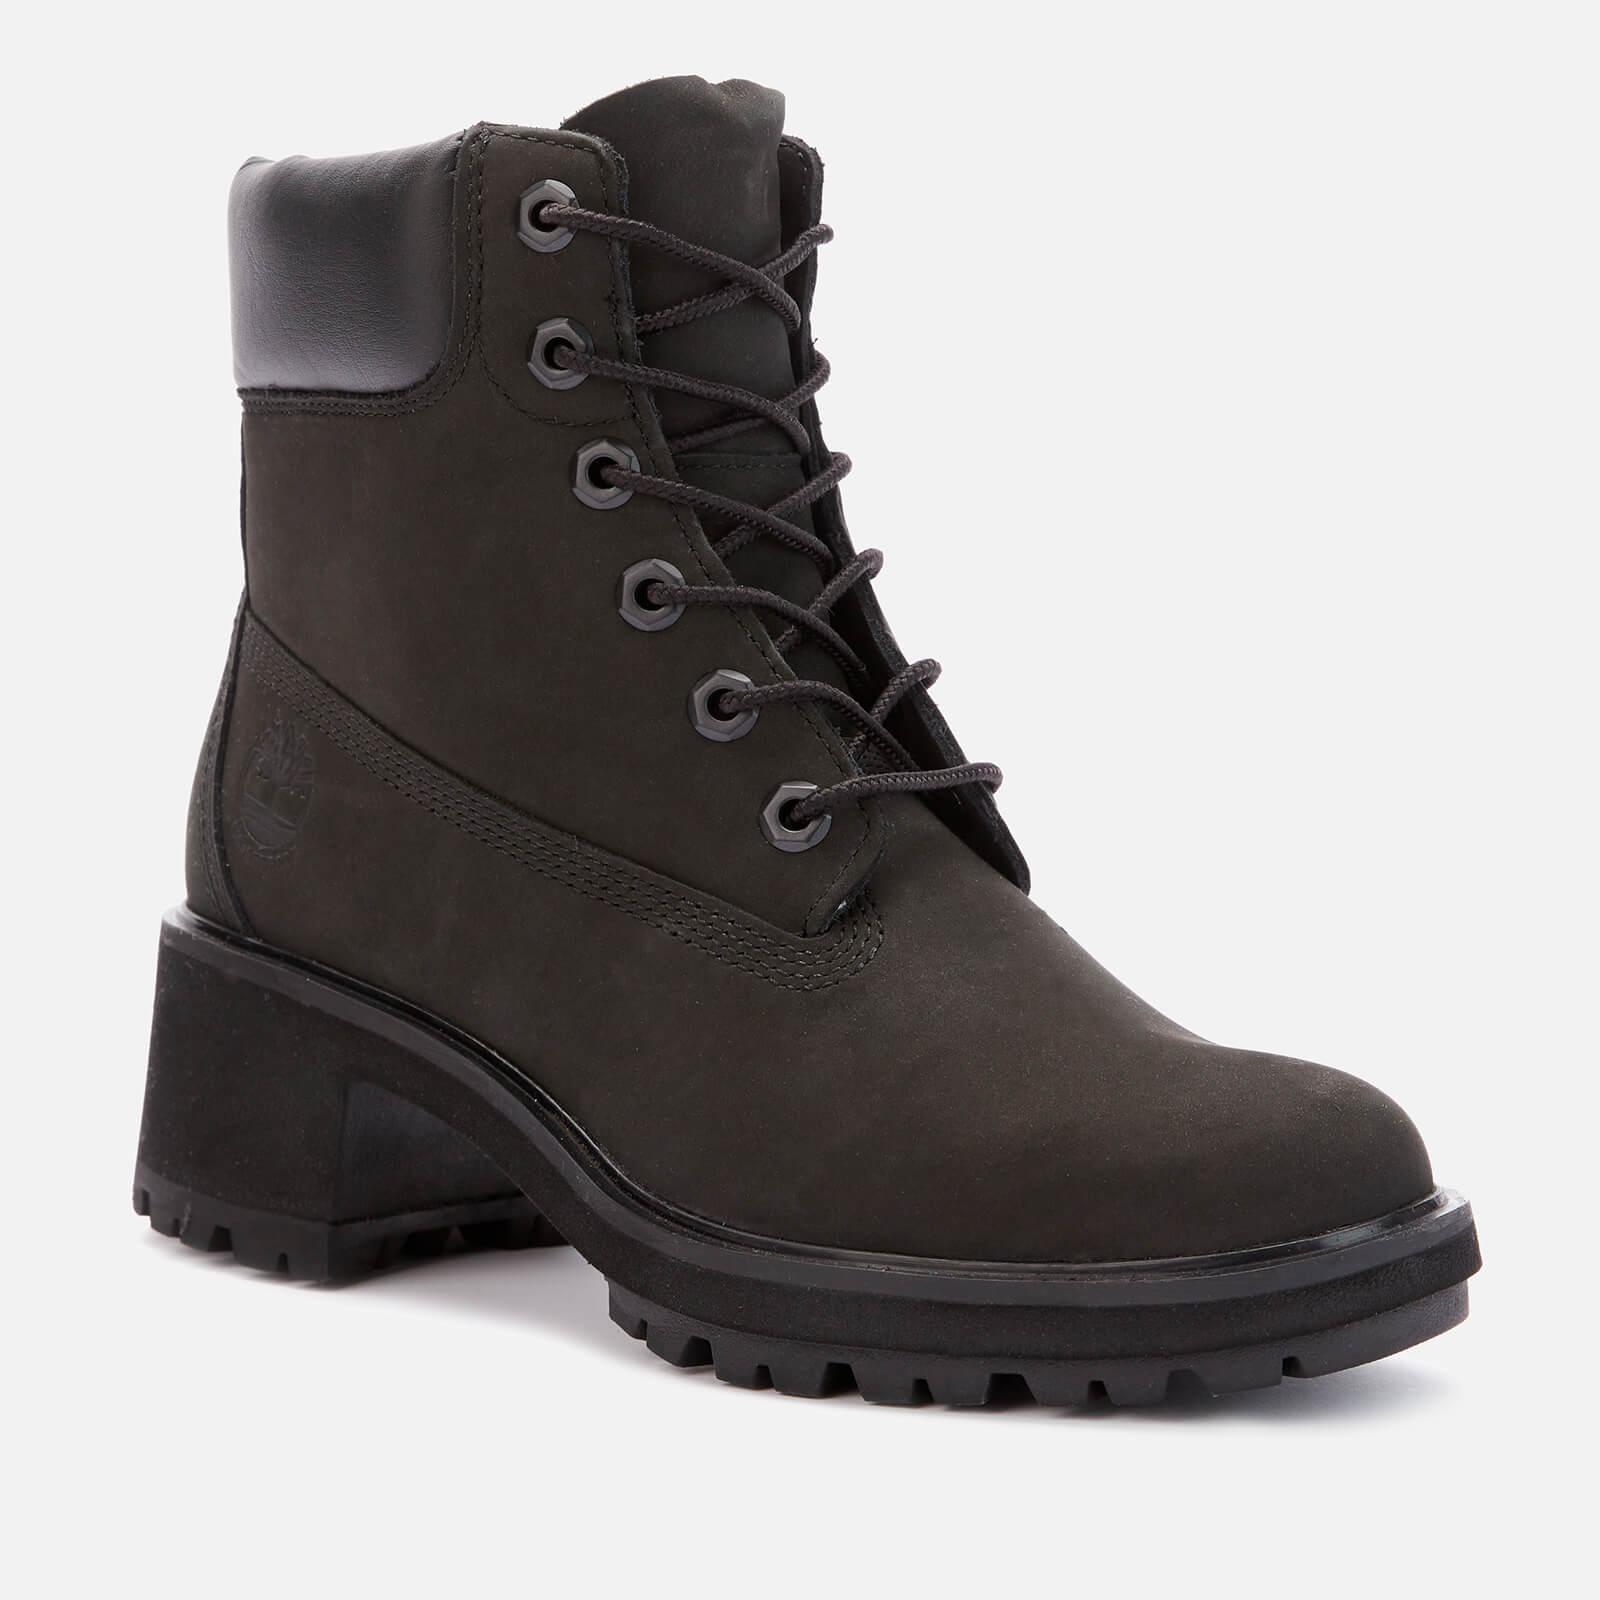 Timberland Rubber Kinsley 6 Inch Waterproof Heeled Boots in Black - Lyst